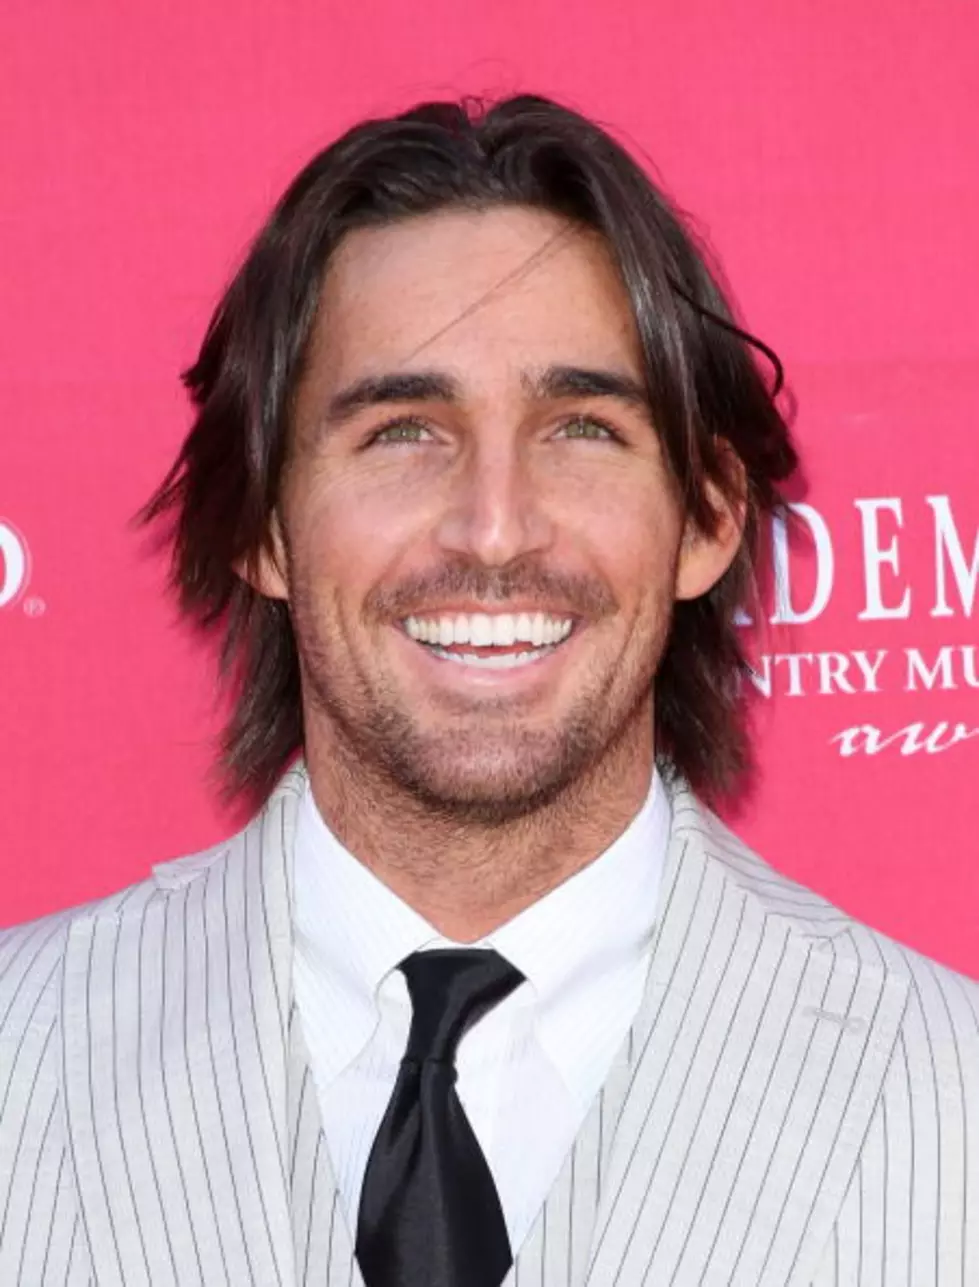 Listen To Cuts From Jake Owen’s New CD [AUDIO]